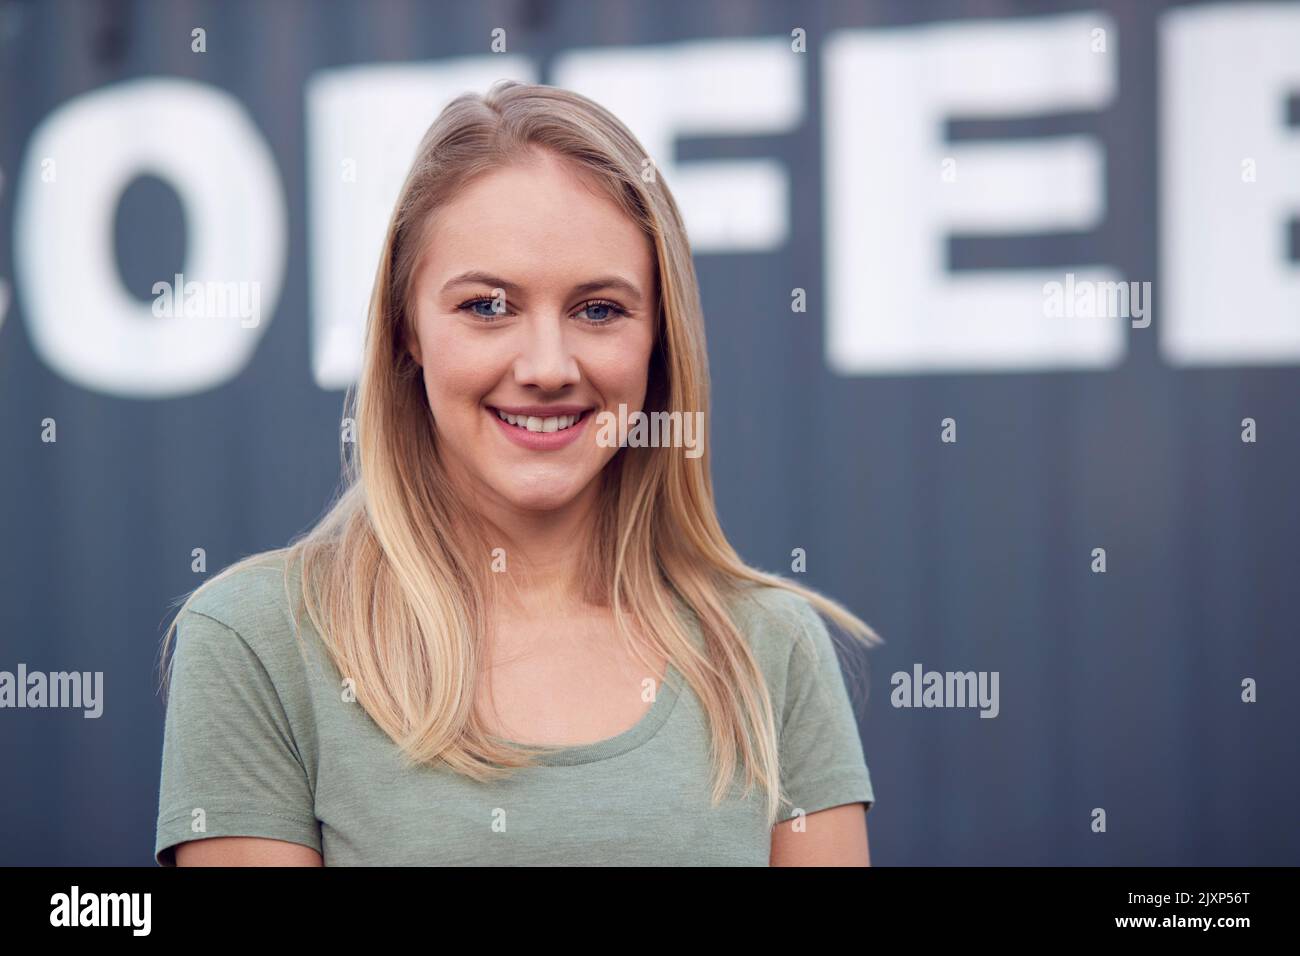 Portrait Of Female Intern At Freight Haulage Business Standing By Shipping Container Stock Photo